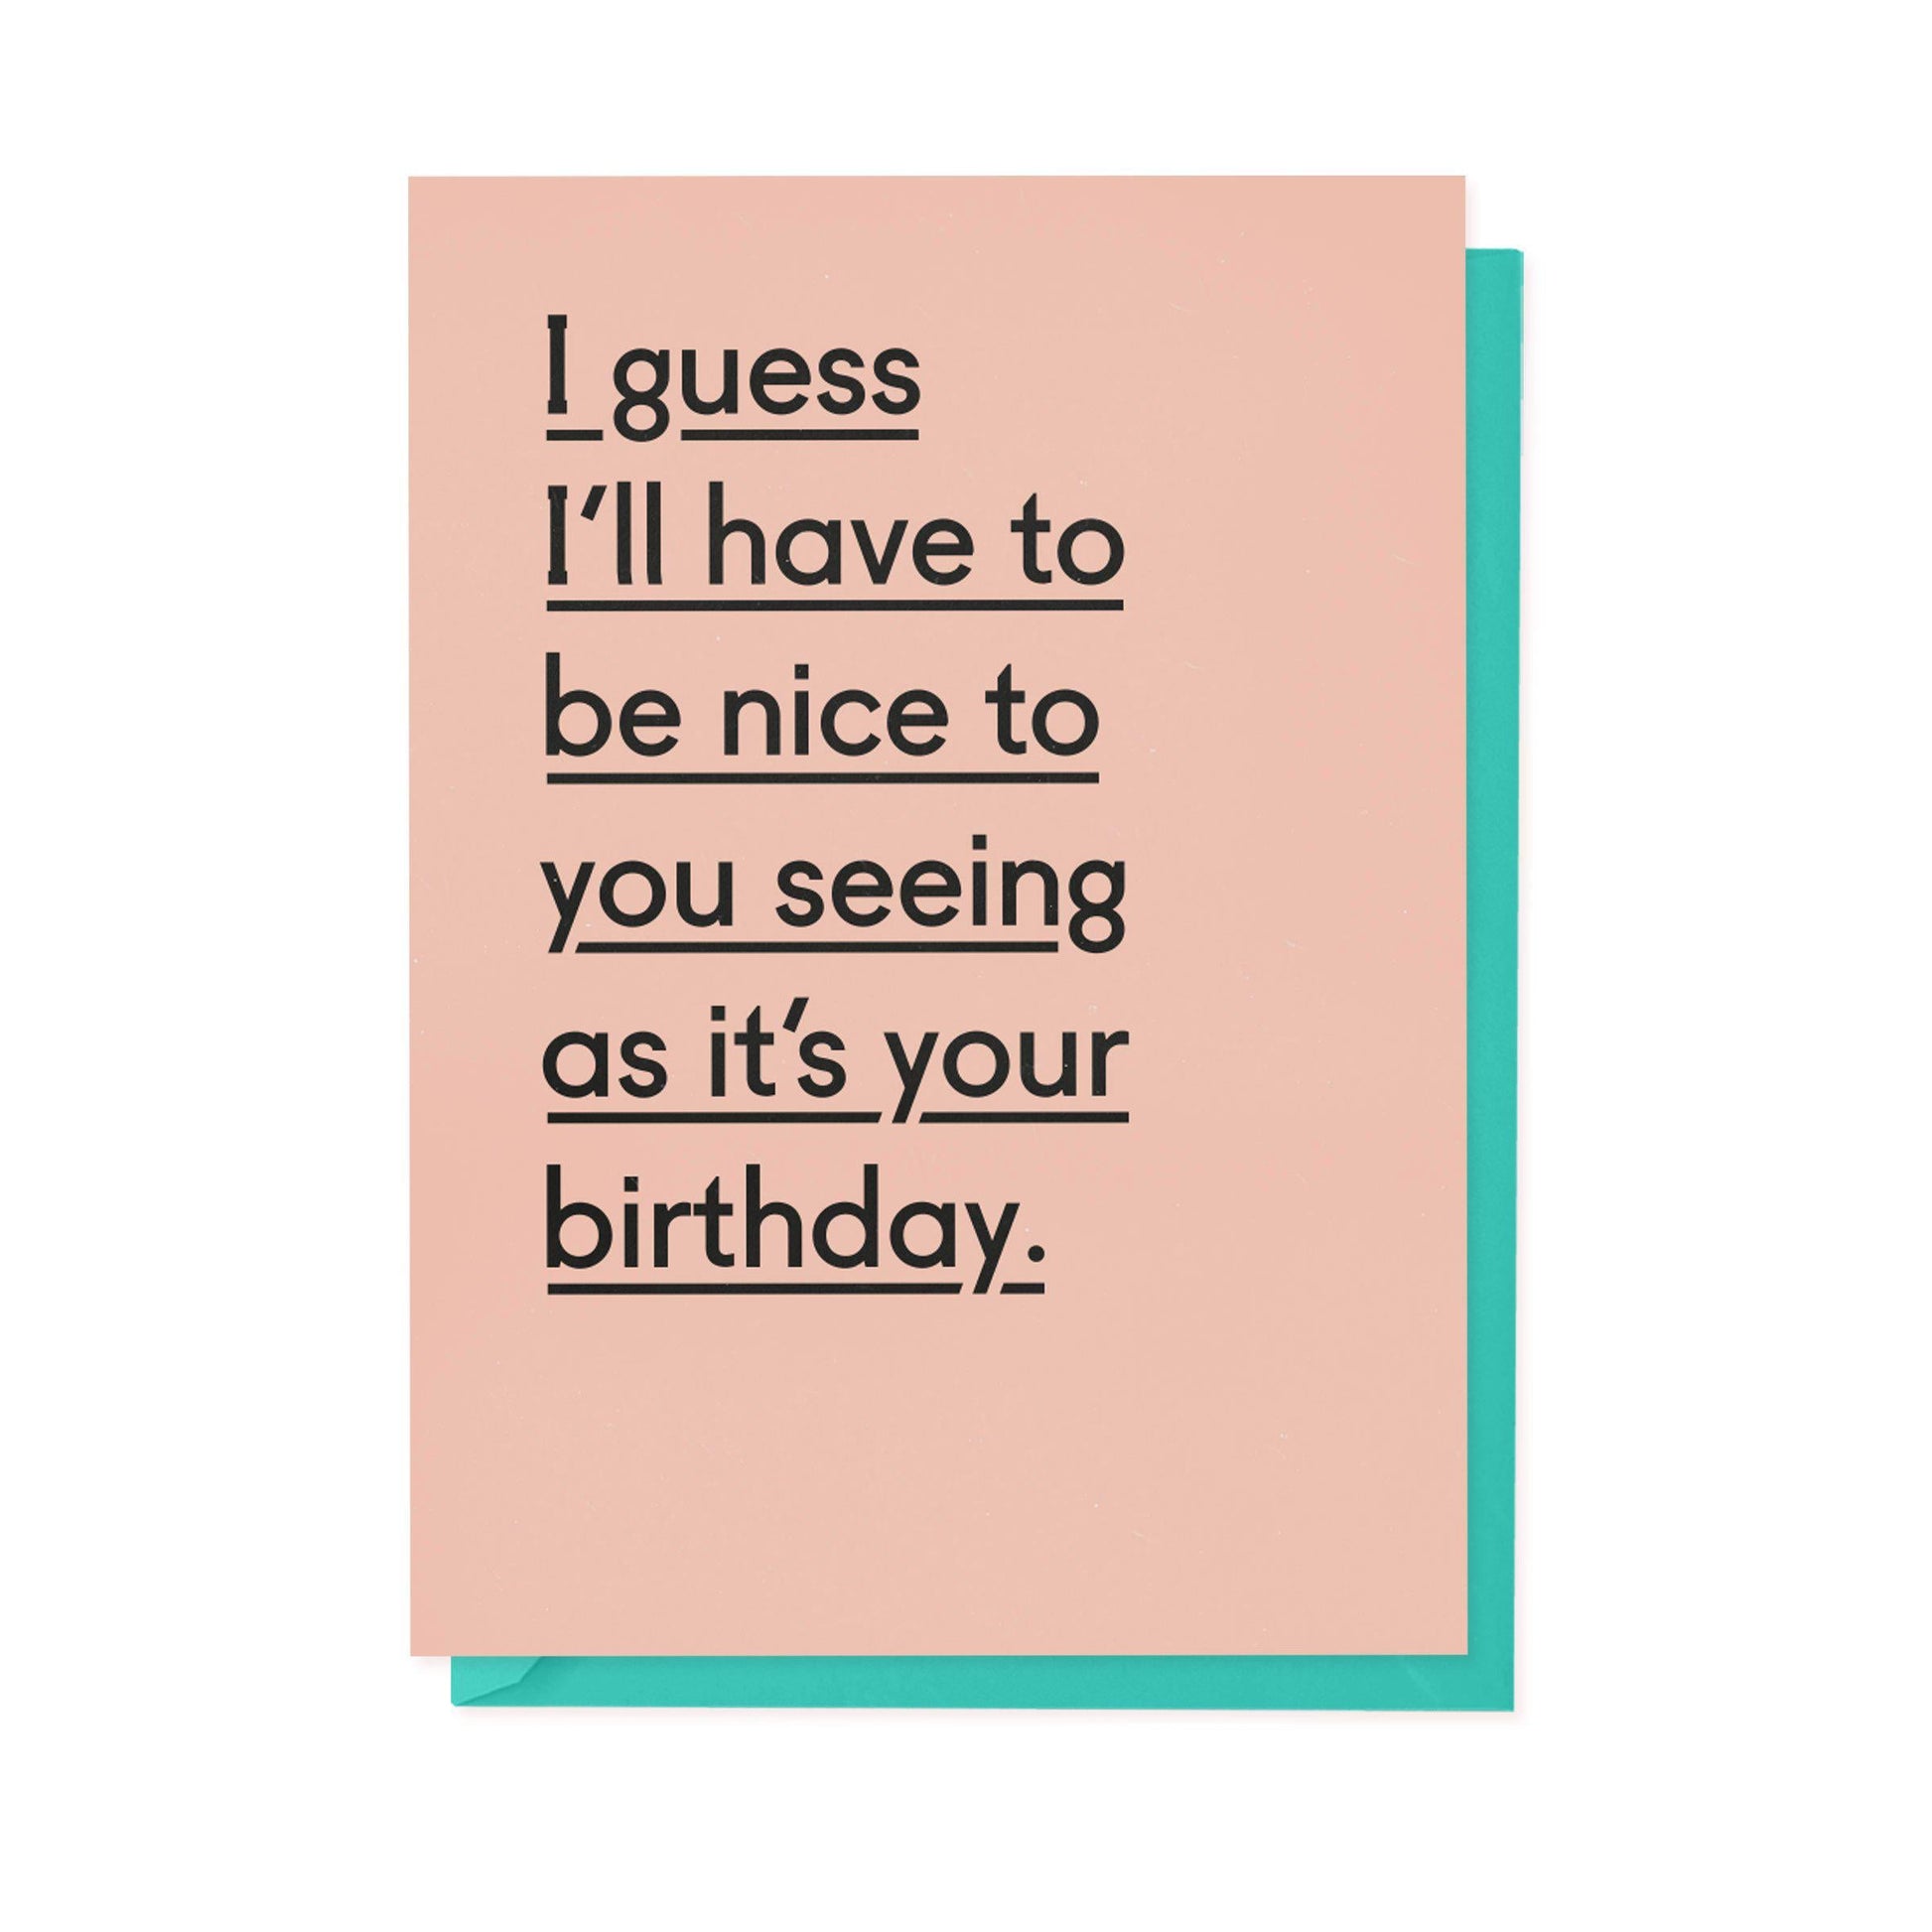 I guess I'll have to be nice to you seeing as it's your birthday-Cards-twin pines-nóta póca